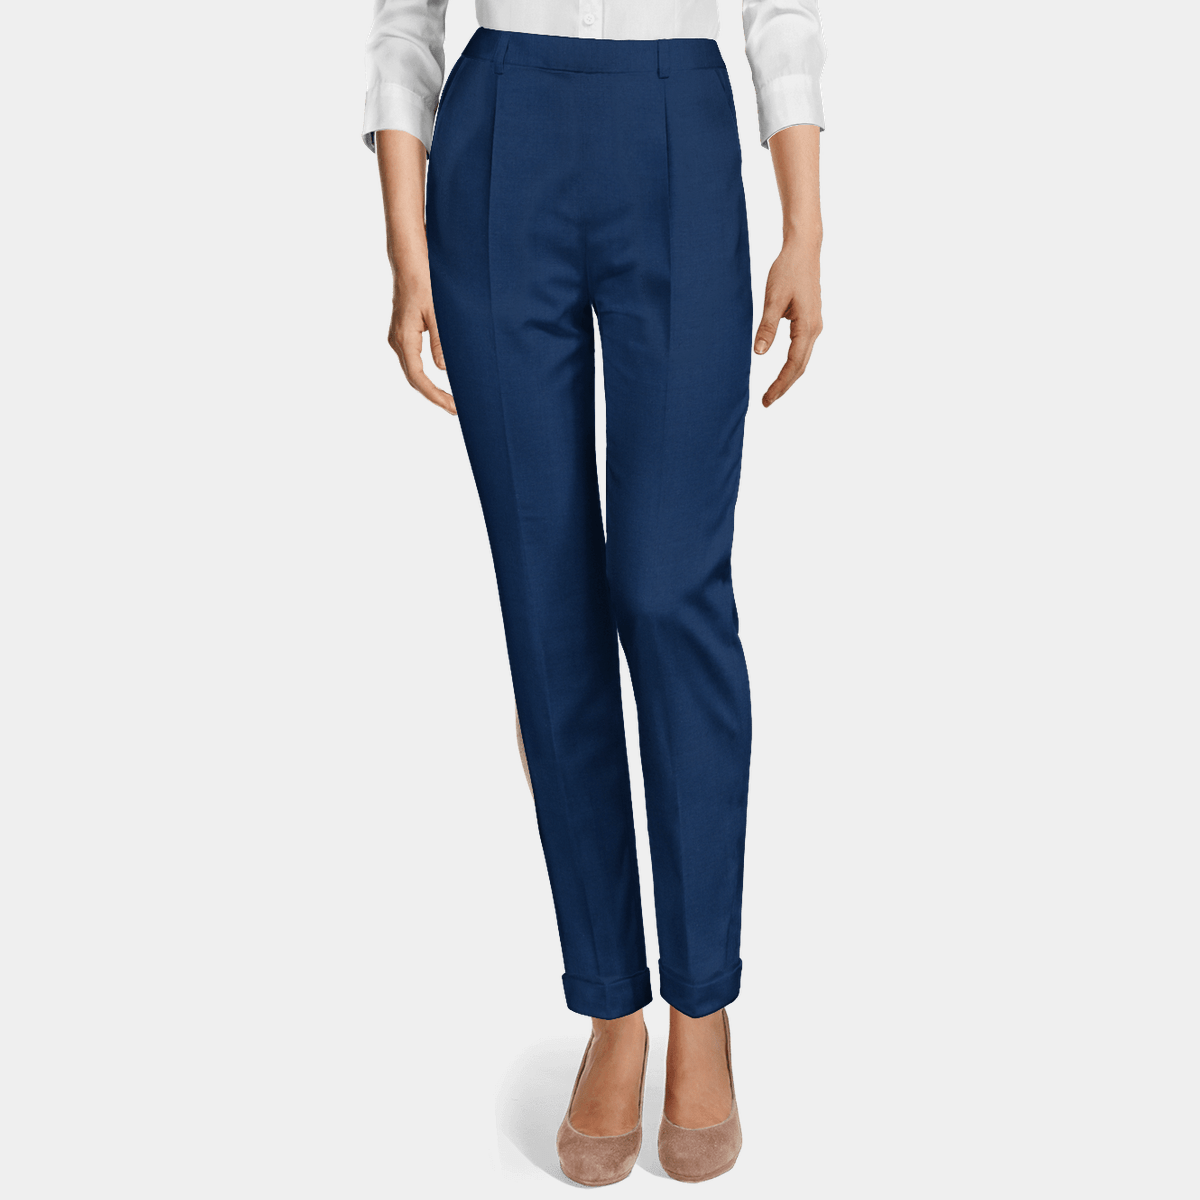 Blue wool blend high waisted pleated cuffed Side Zip Pants